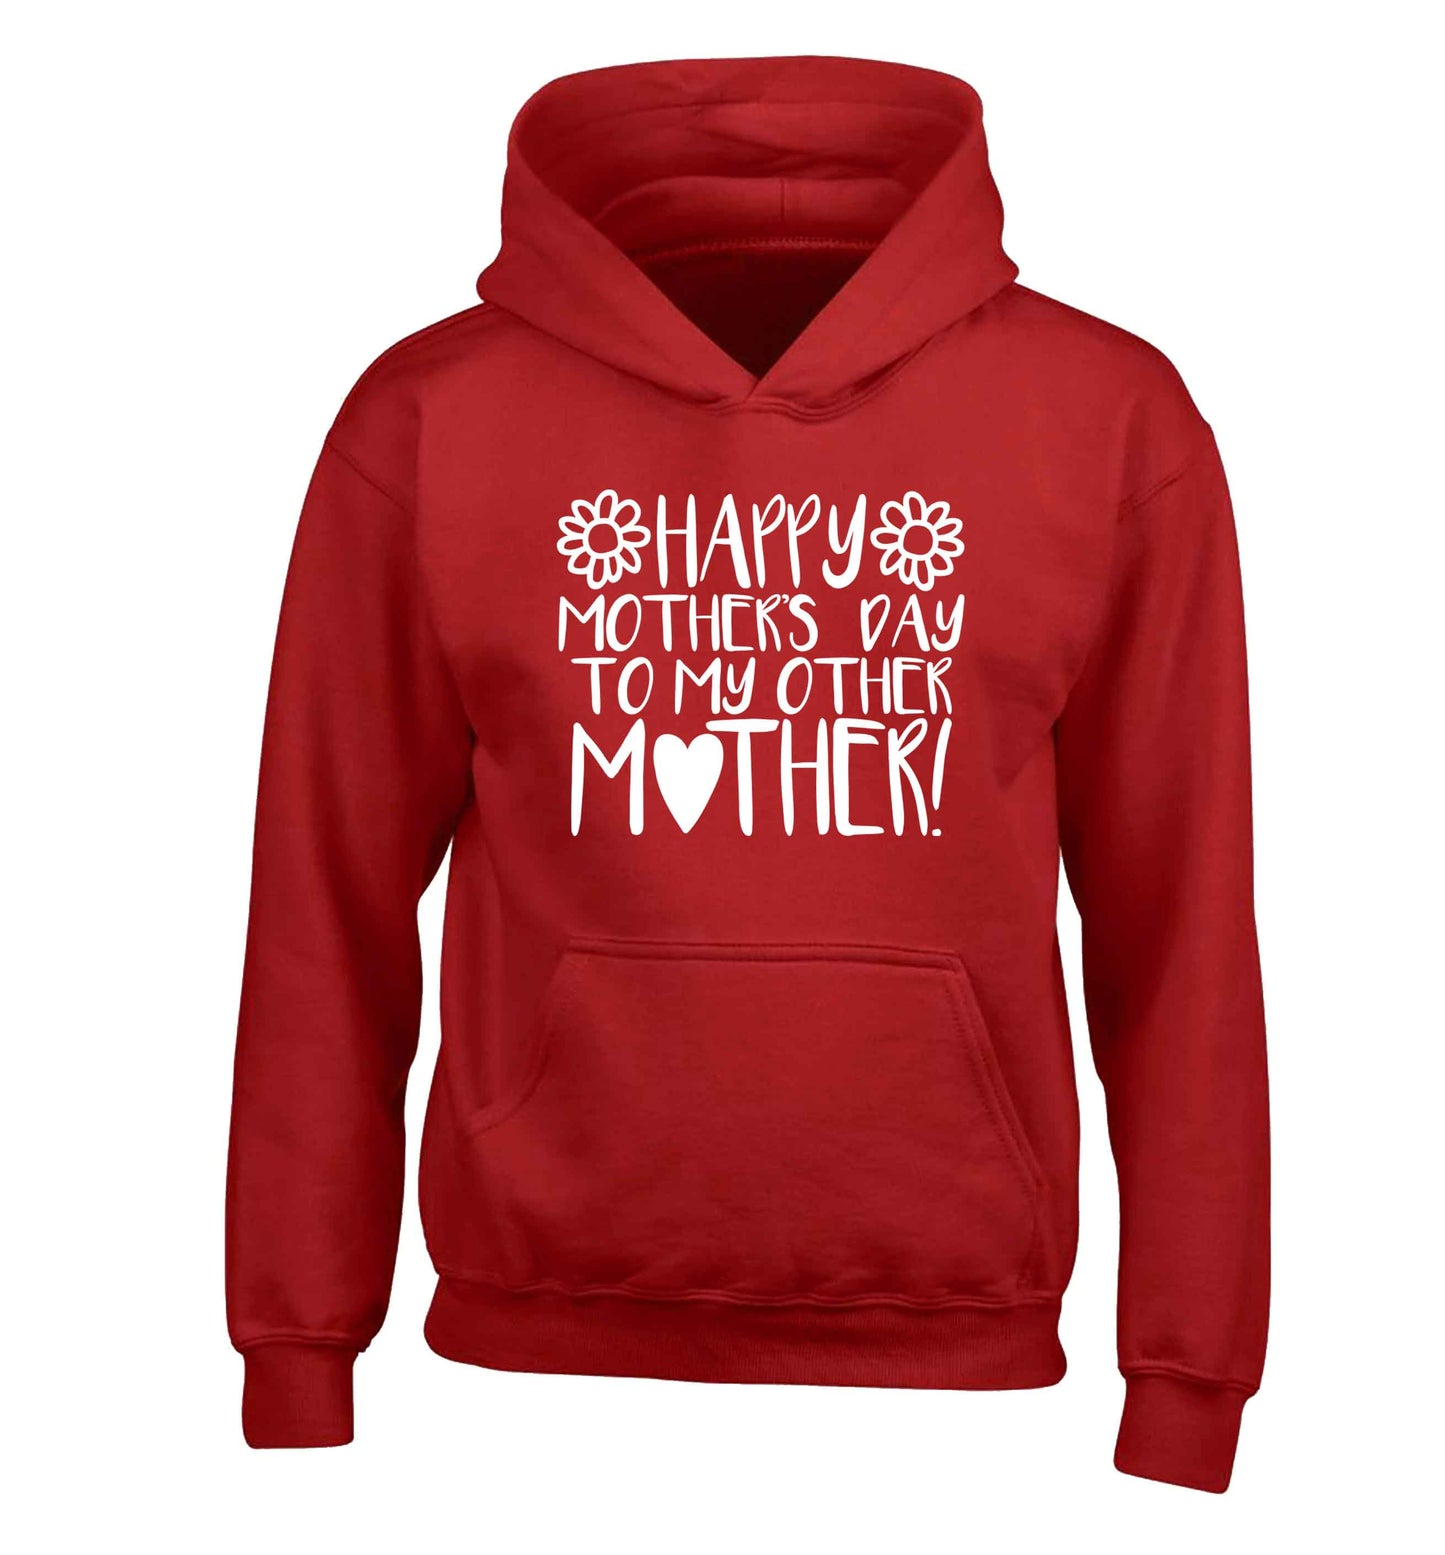 Happy mother's day to my other mother children's red hoodie 12-13 Years